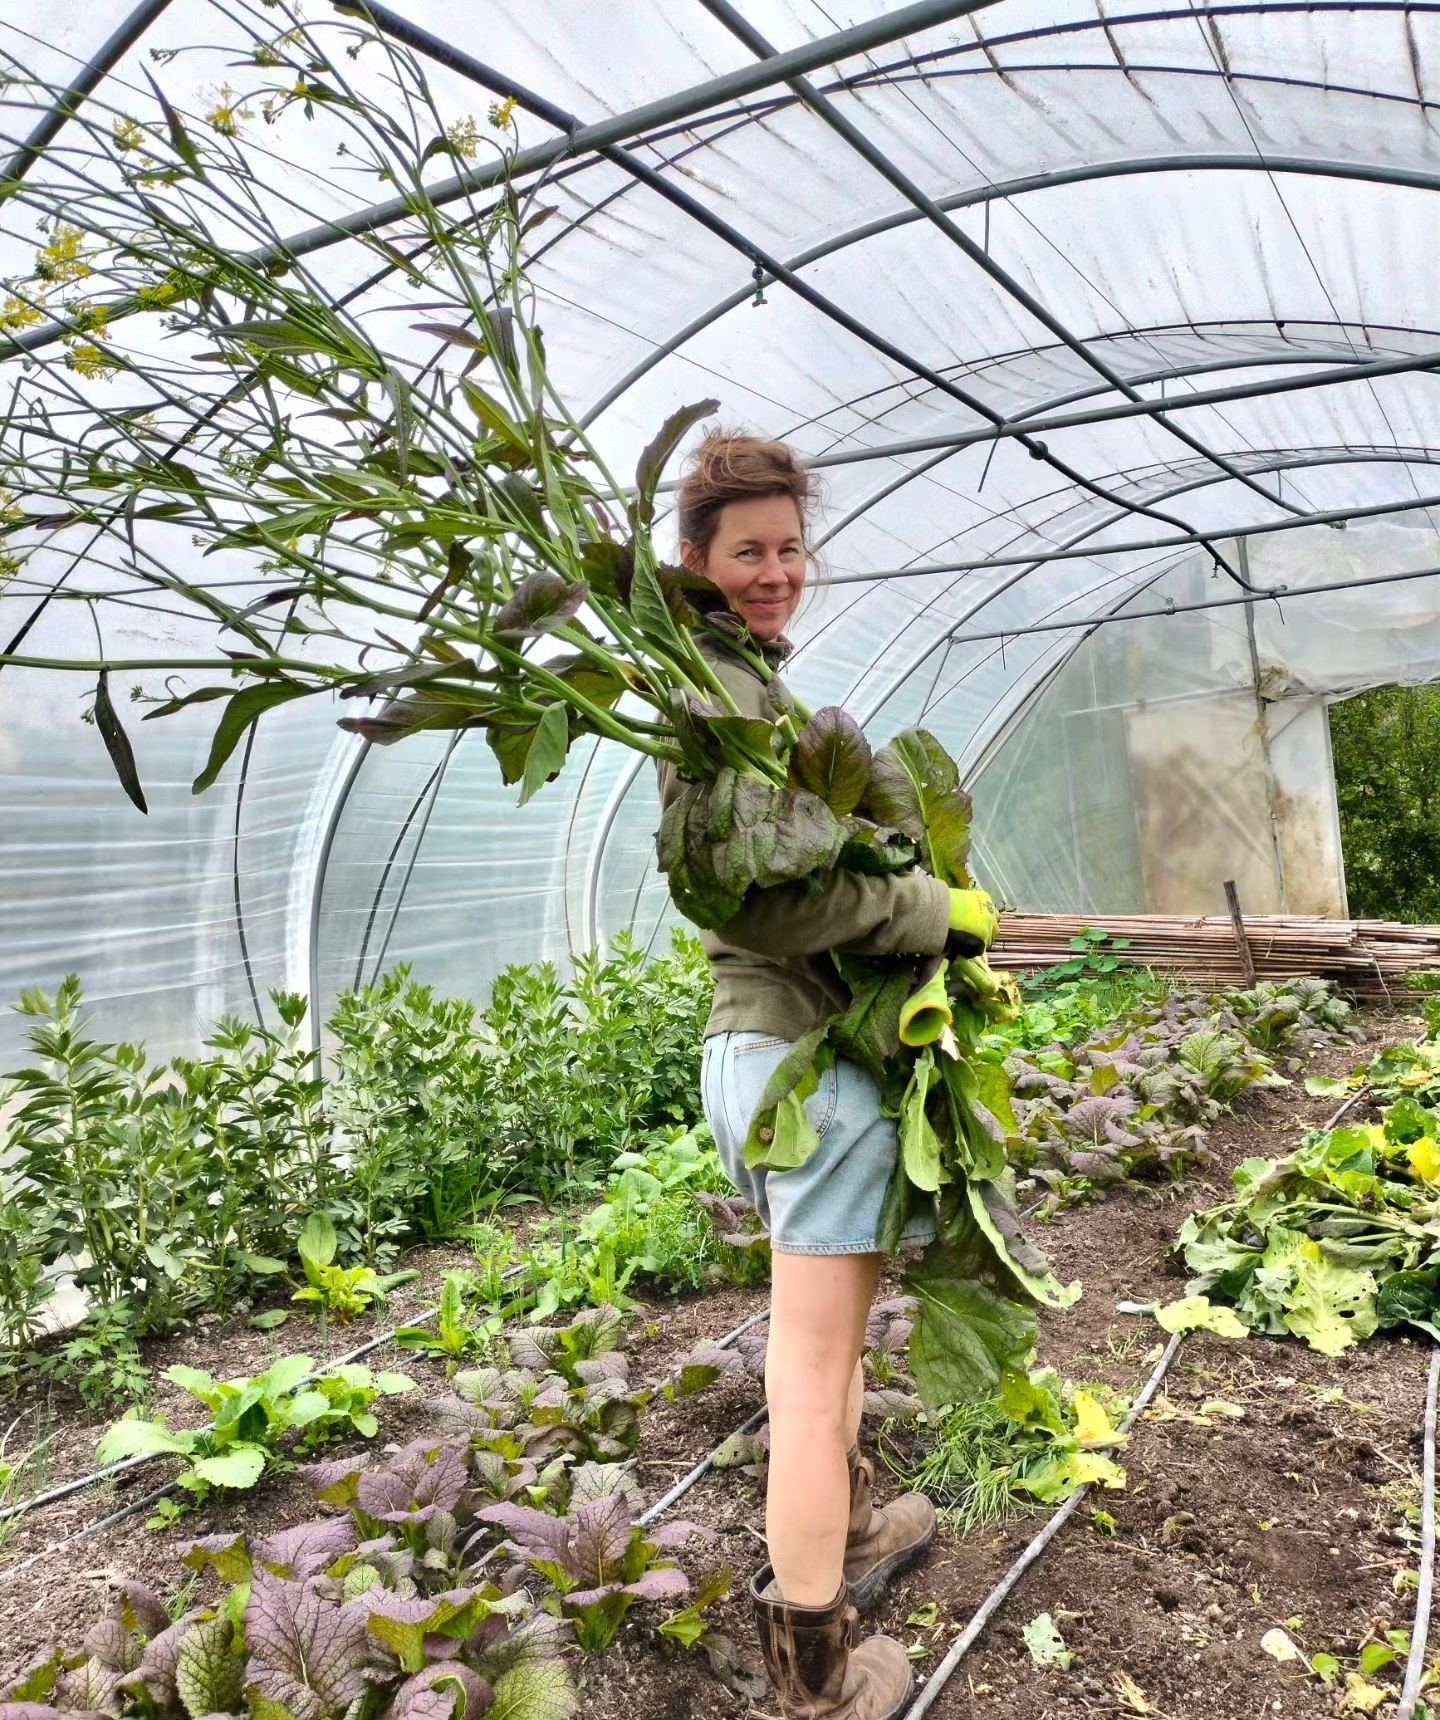 Clearing out the greenhouses! 
Bye bye red giant and hi eggplants! Isabelle there for scale! 
Do you wish to receive weekly vegetables as well? 
If so then sign up via our link in bio!